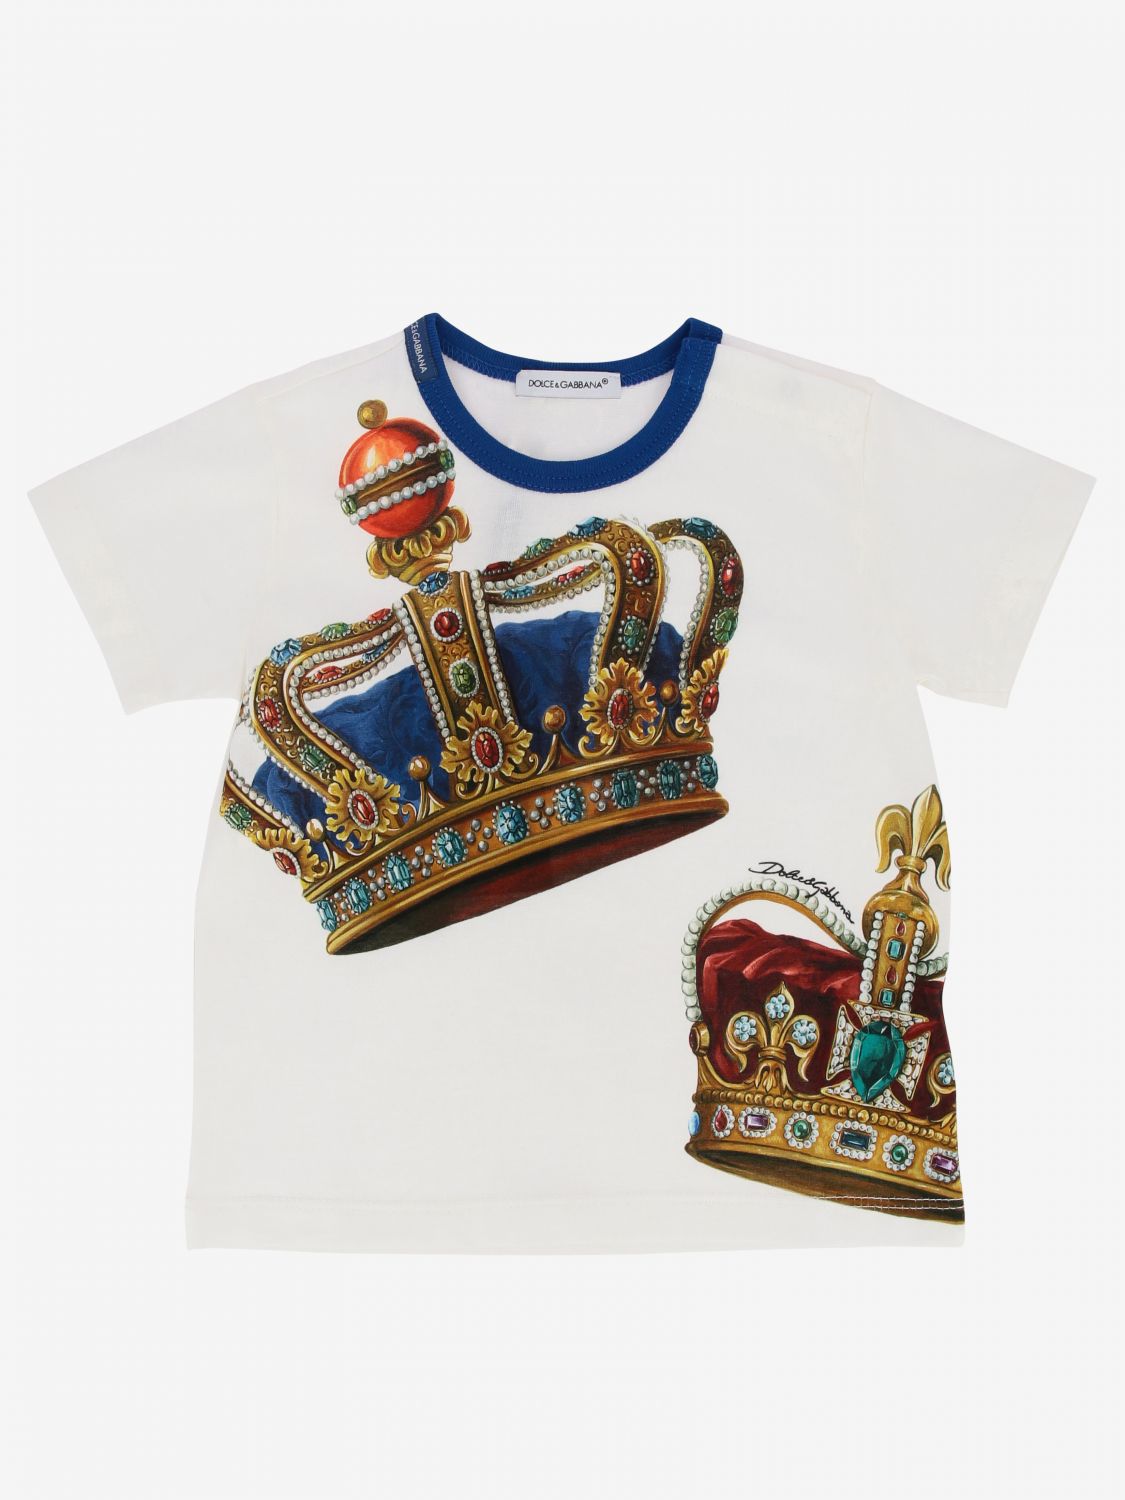 Mysterie kubus vooroordeel Dolce & Gabbana Outlet: t-shirt with crown print | Sweater Dolce & Gabbana  Kids White | Sweater Dolce & Gabbana L1JT6S G7VJR GIGLIO.COM